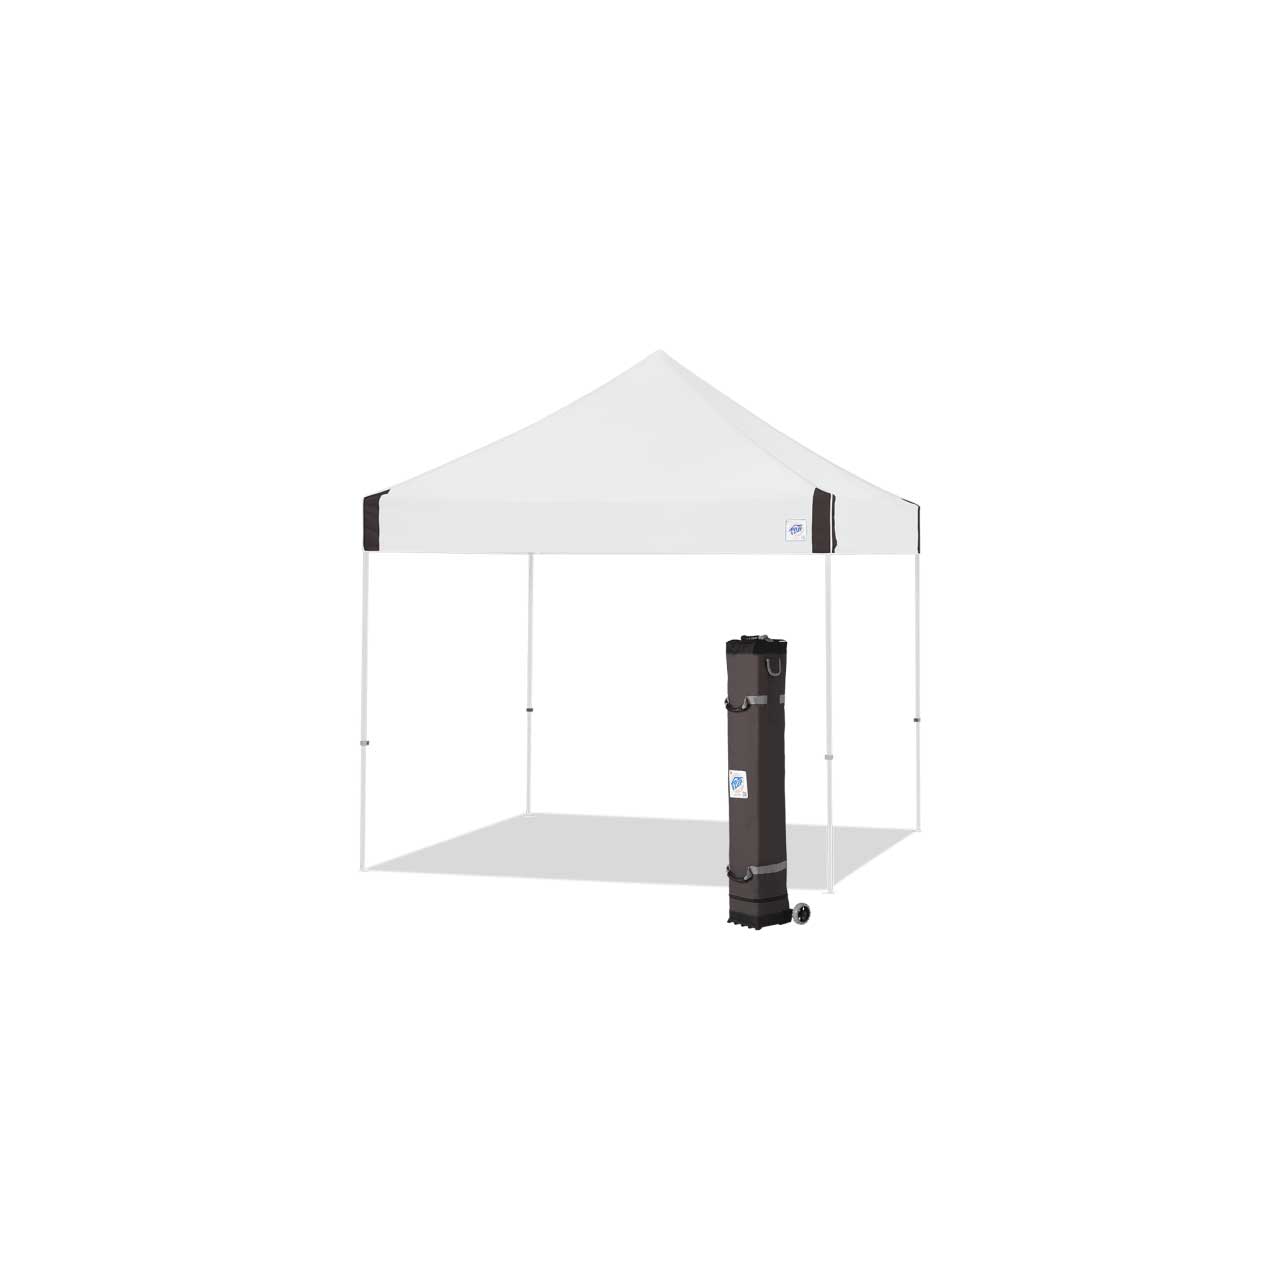 E-Z UP VG3WH10WH Vantage 10x10 Canopy - White Frame / White Top VG3WH10WH